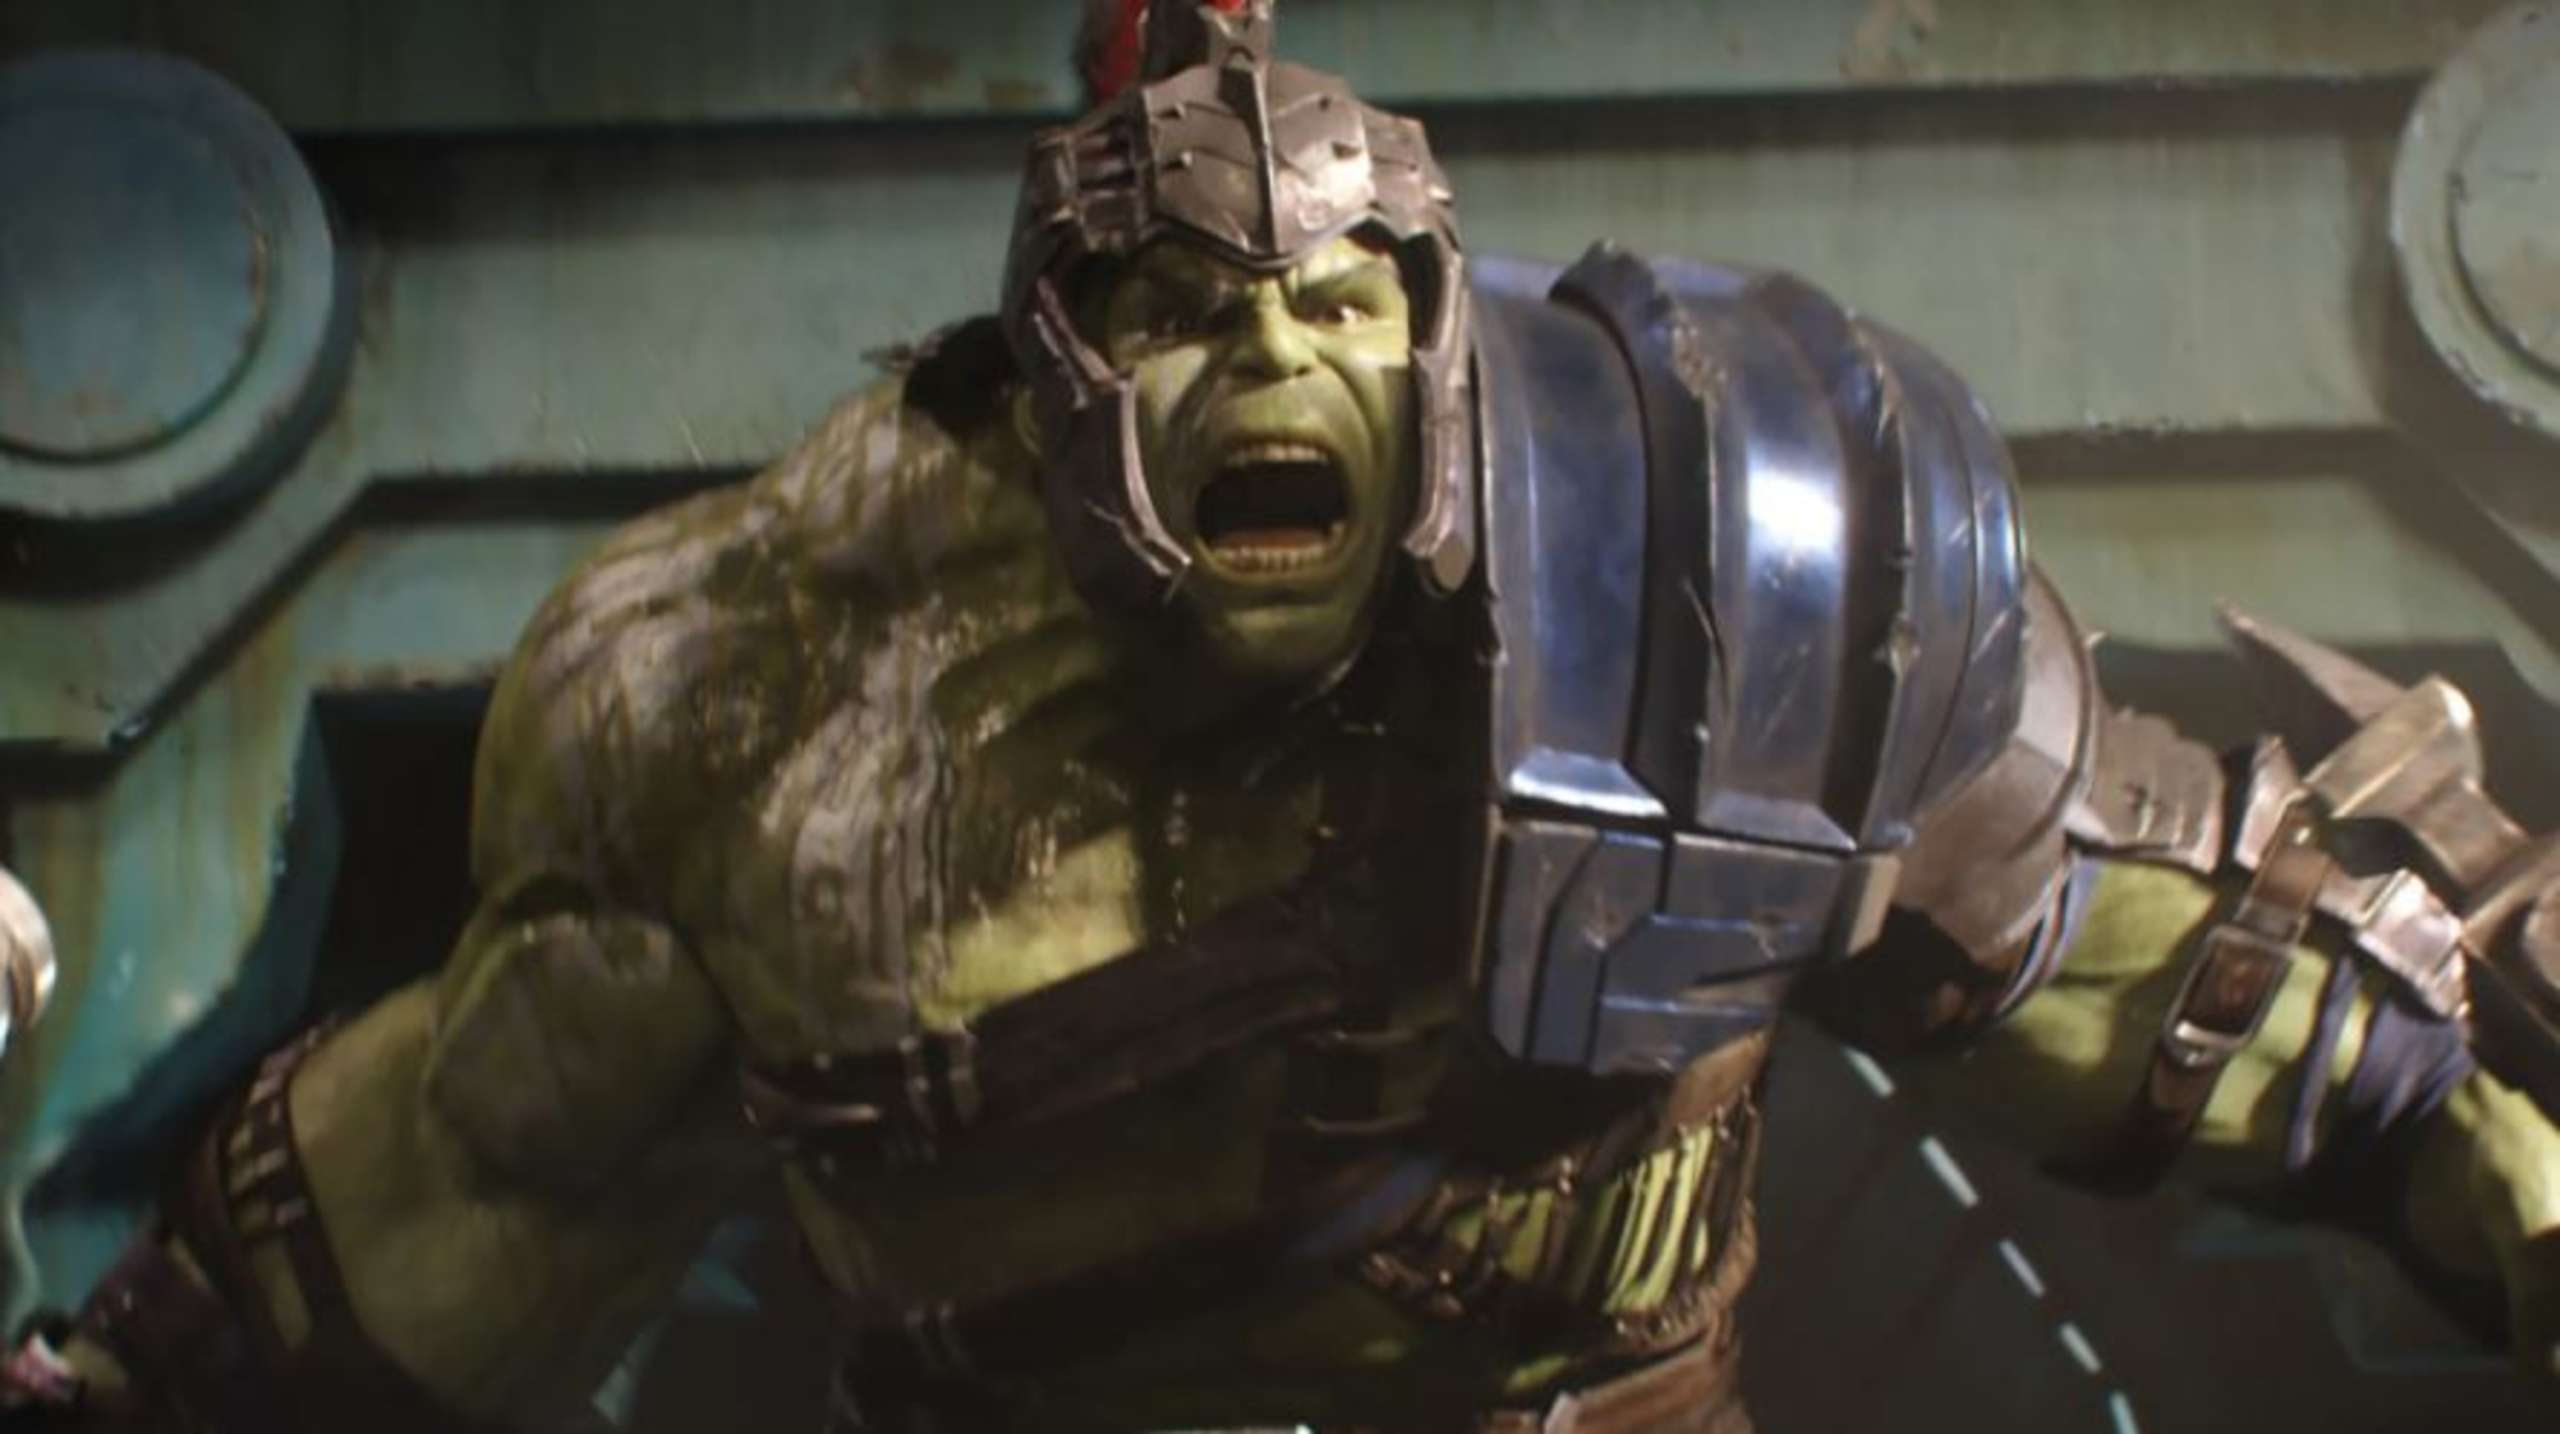 Thor And The Hulk Now Have New Clothes Based On Their Gladiatorial Garb From Thor: Ragnarok In Crystal Dynamics’ Marvel’s Avengers